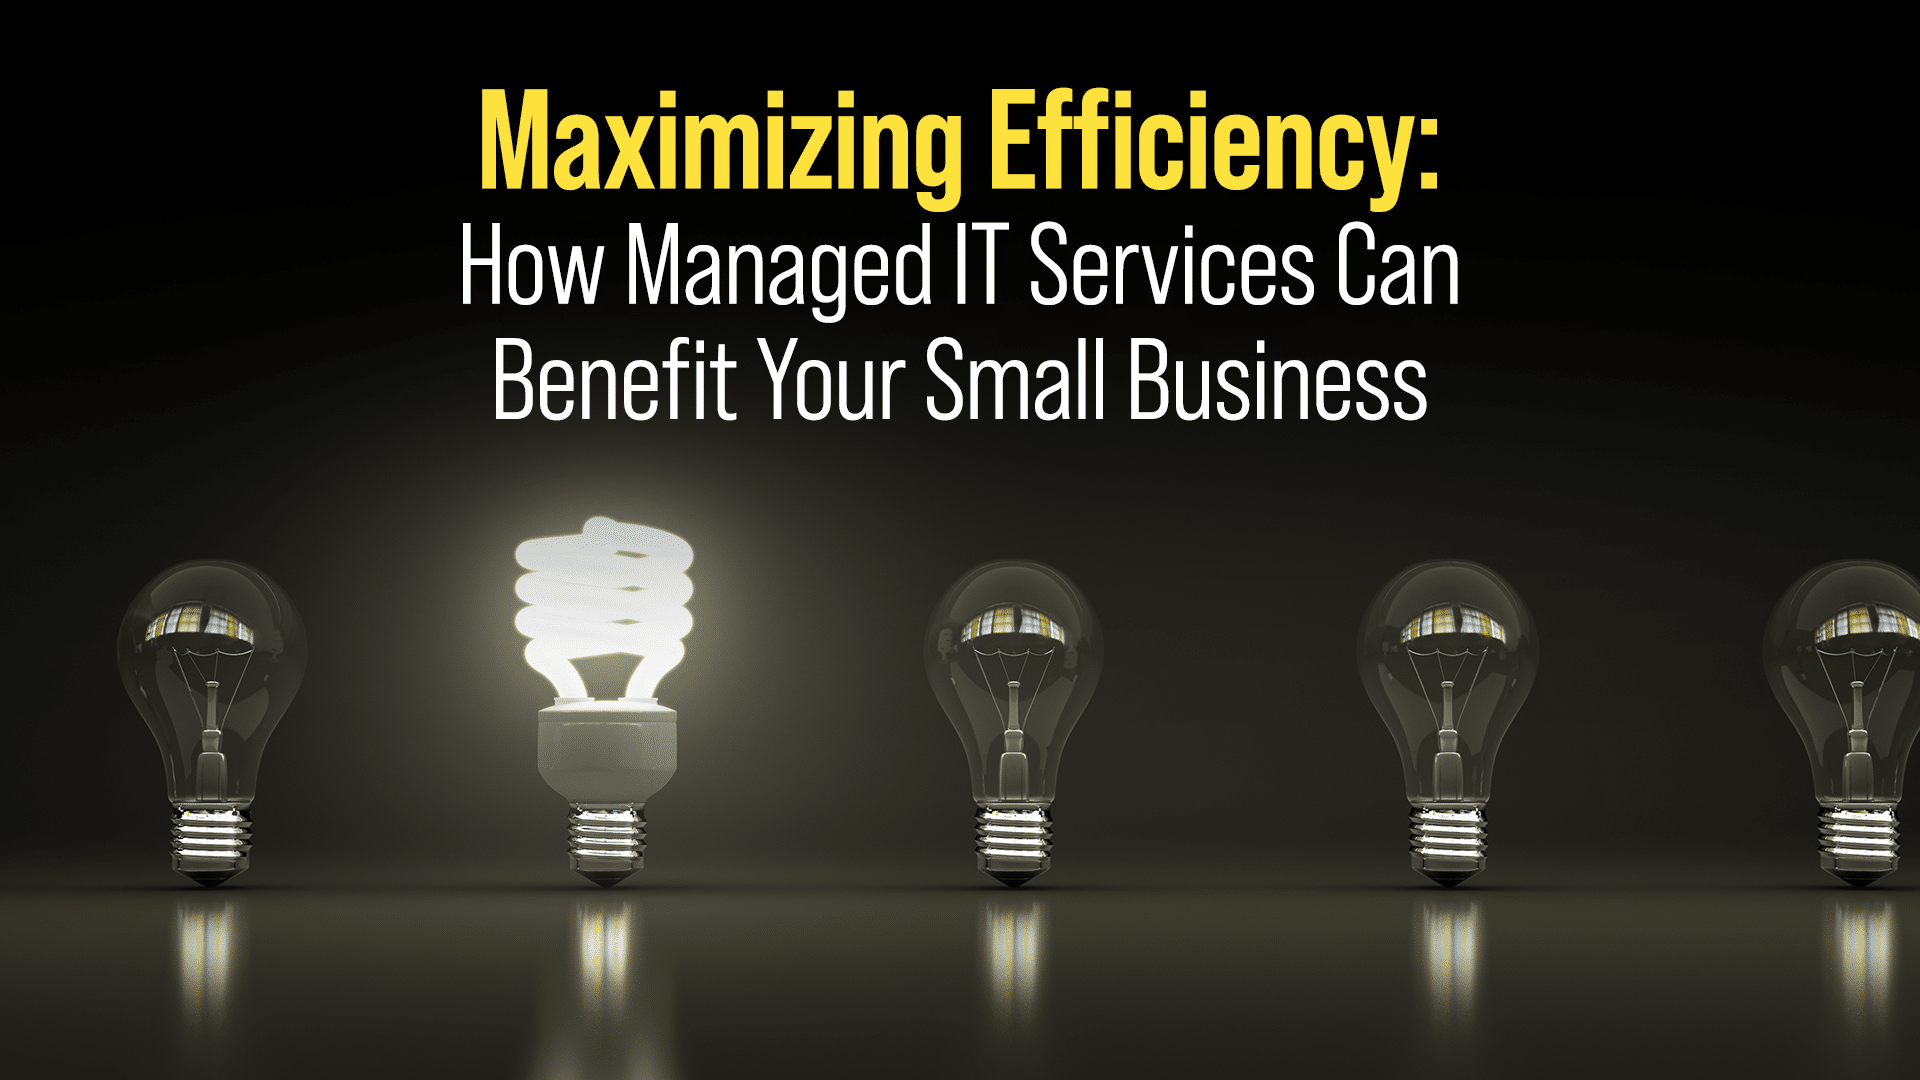 Maximizing Efficiency: How Managed IT Services Can Benefit Your Small Business